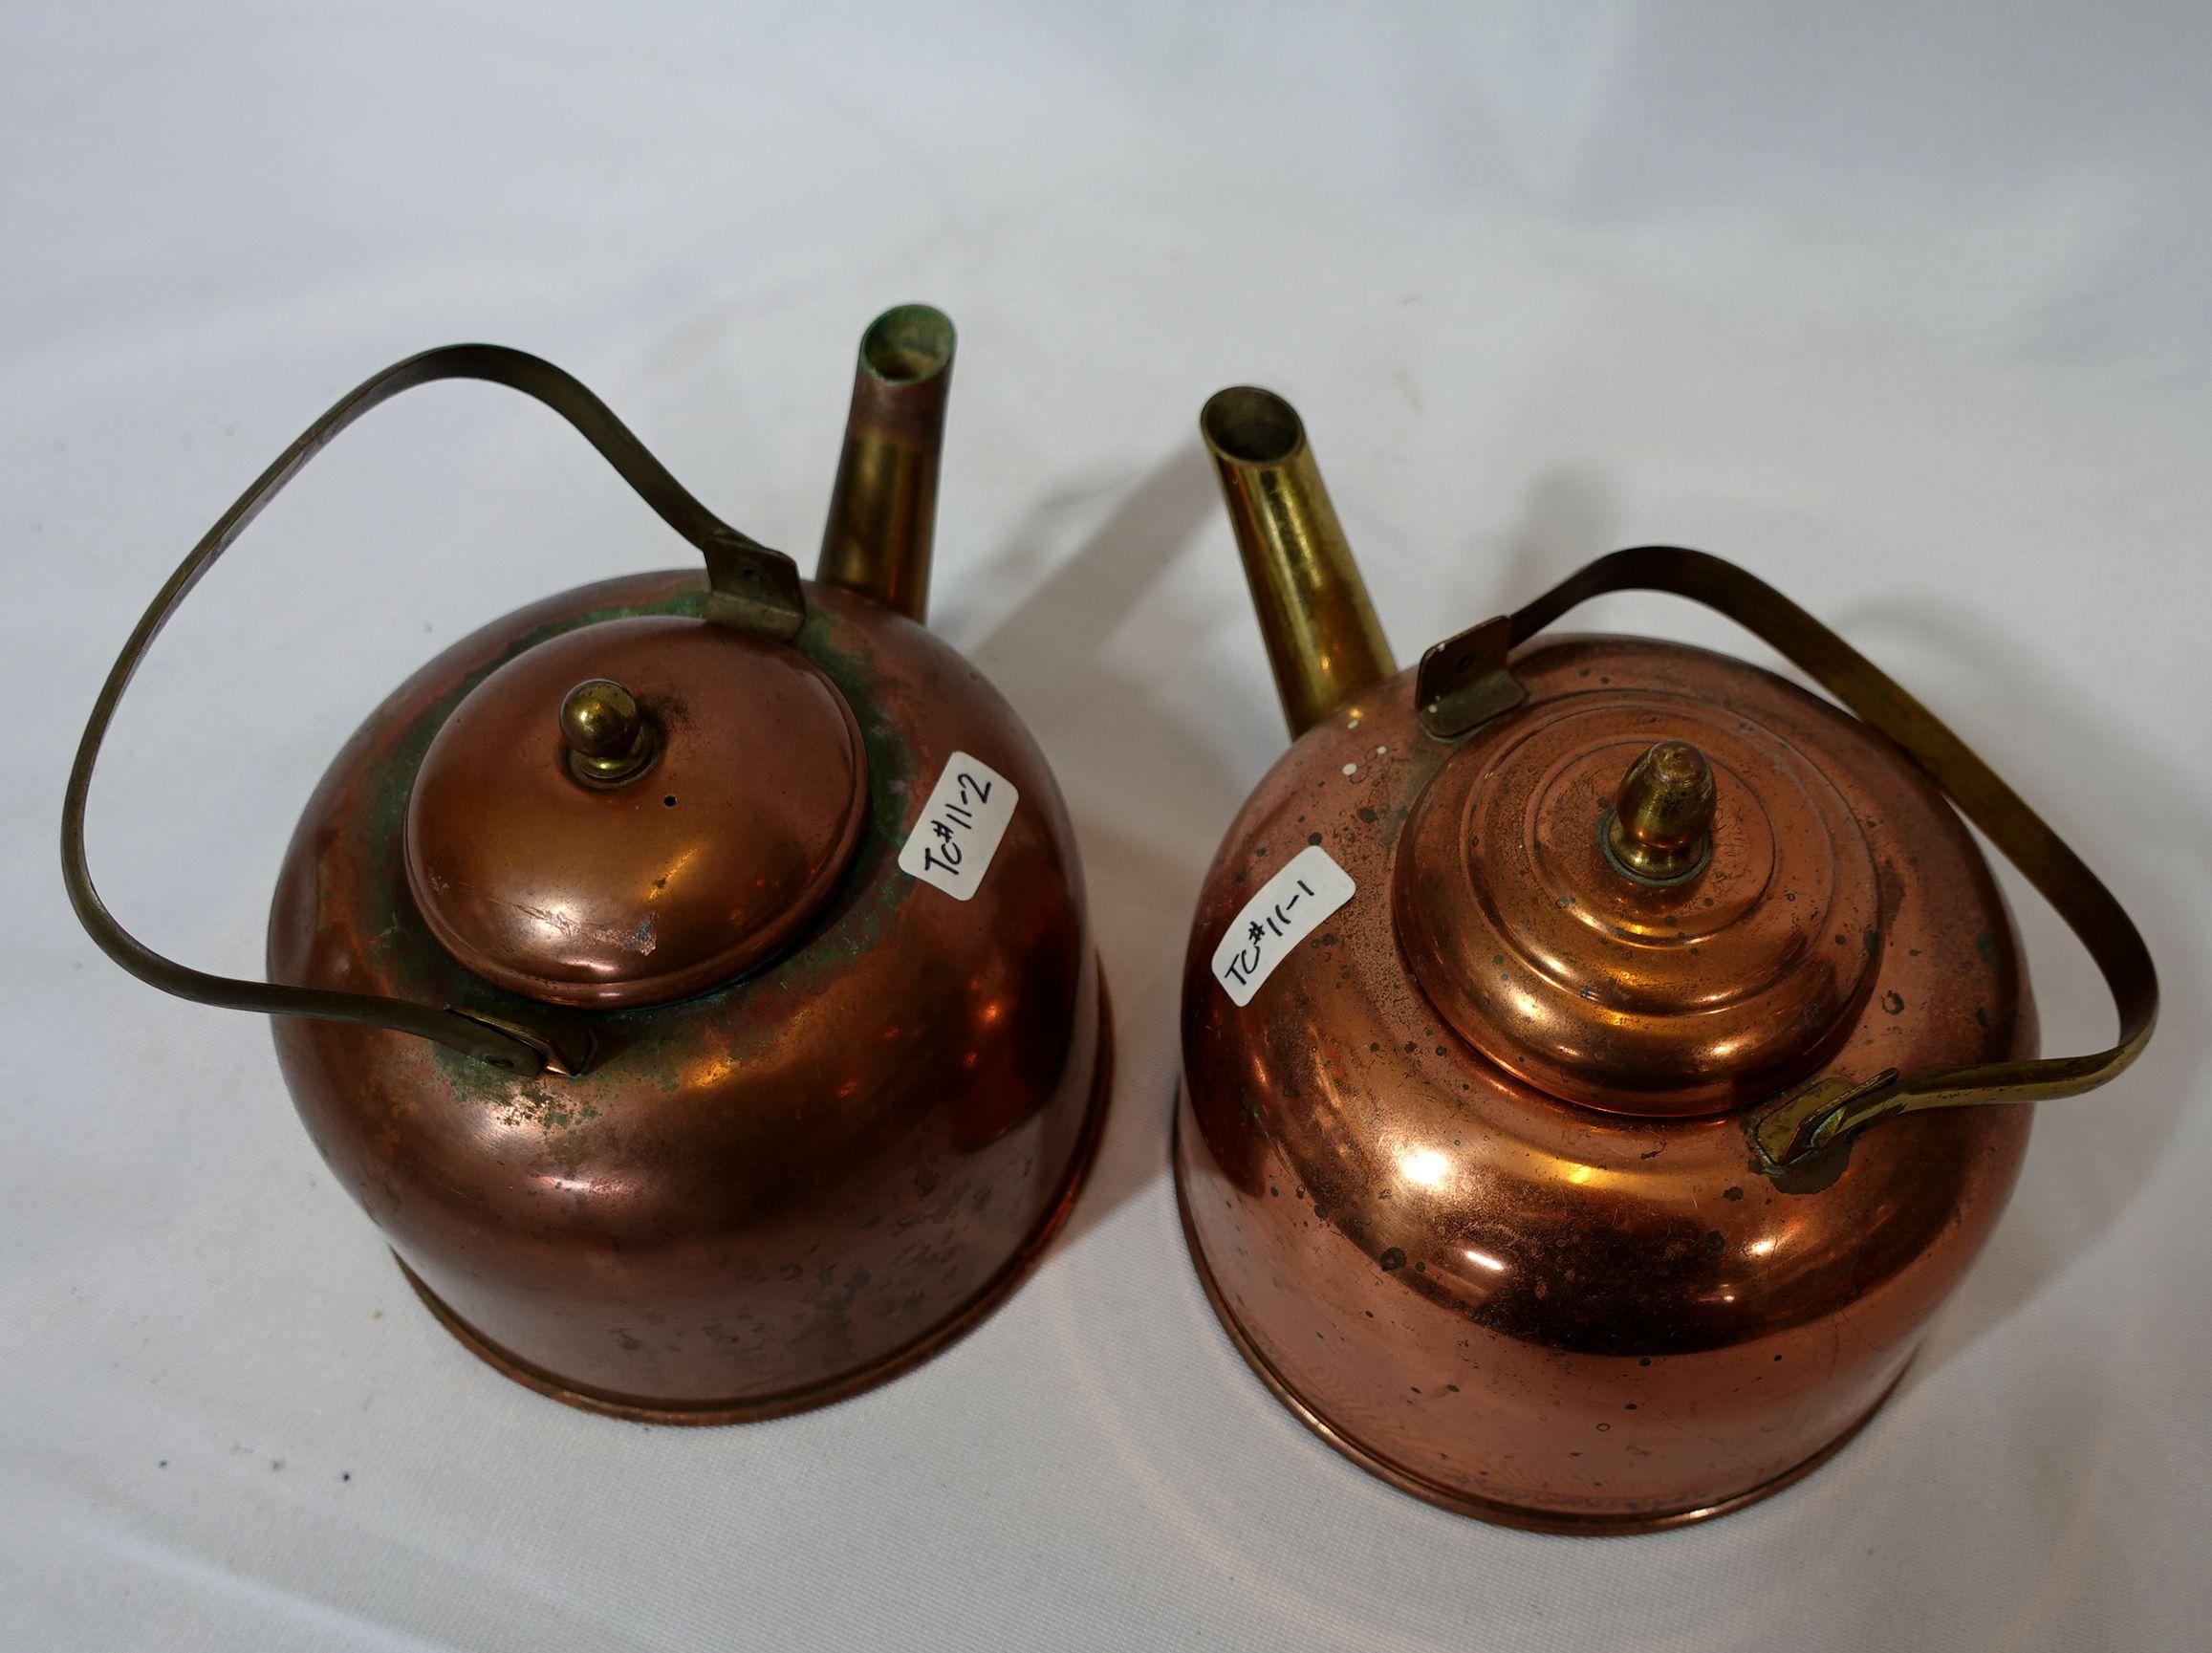 Pair of American Copper Tea Kettle, TC#11-1 & 2 For Sale 7